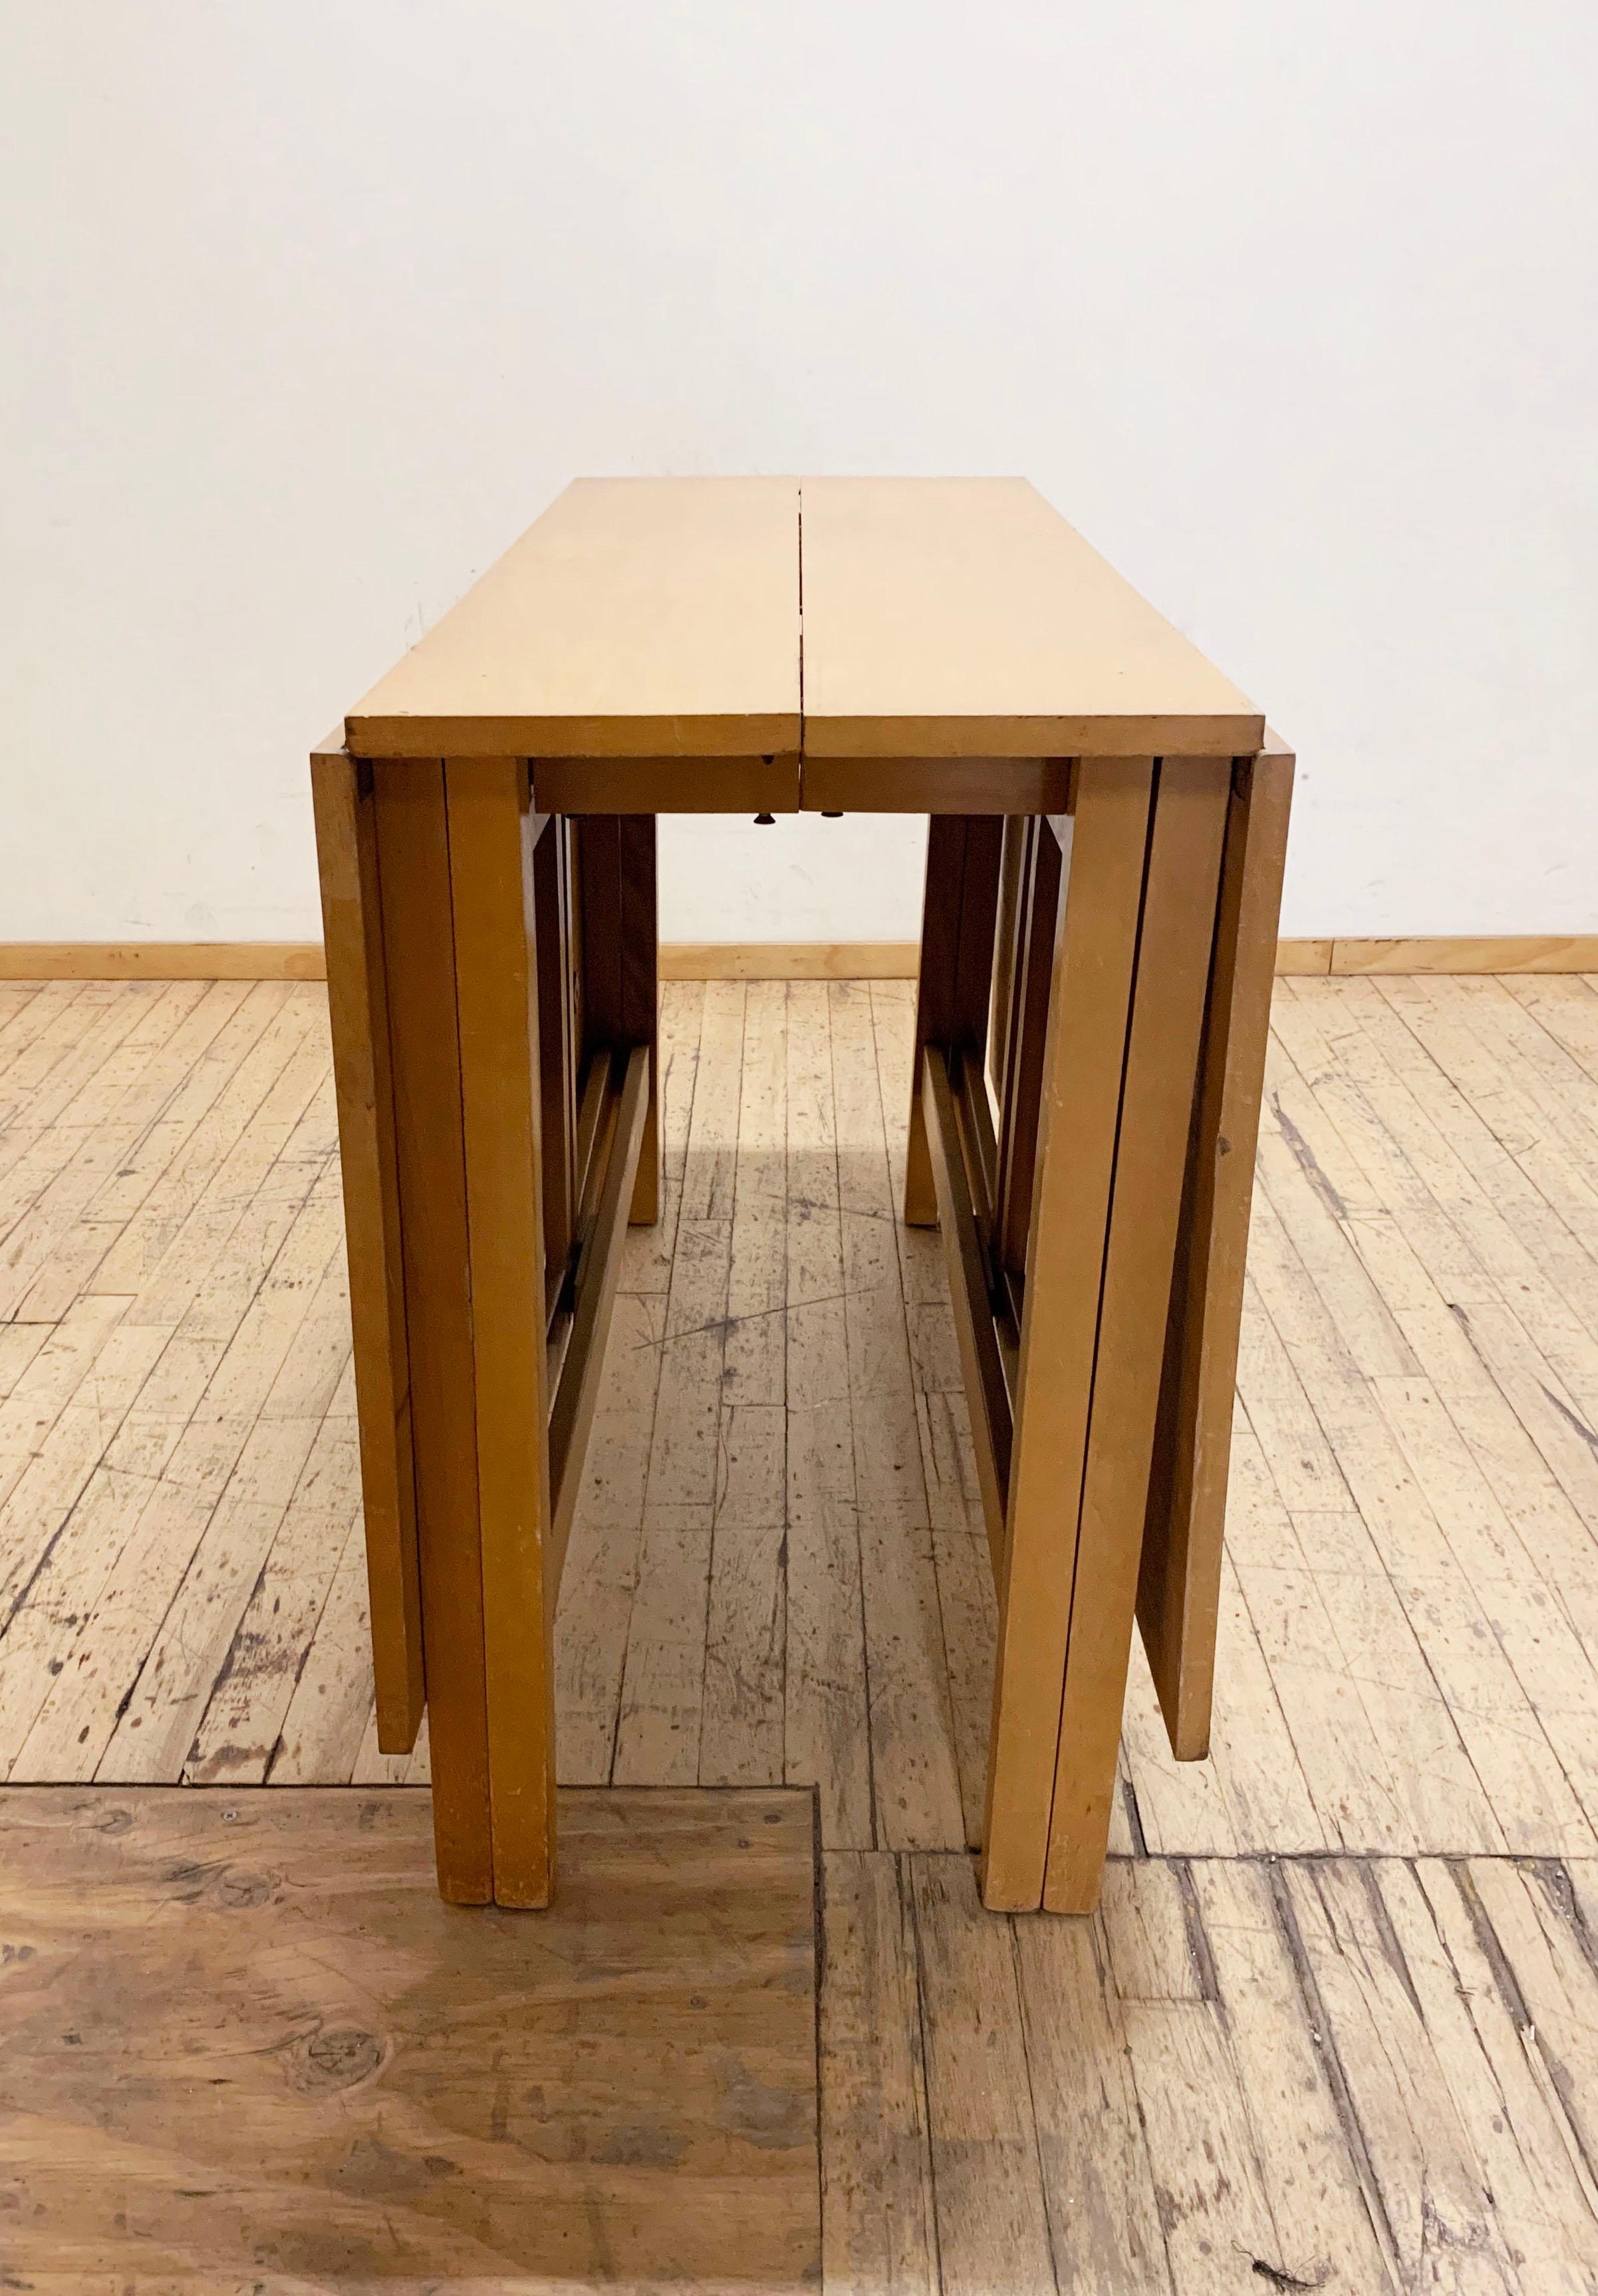 Vintage Gate Leg Dining Table attributed to Bruno Mathsson.
I fine early design example of this gate-leg design. One notable difference from the Mathsson design is the simplicity of the legs. There are no rounds. 
also note the fine detailing border